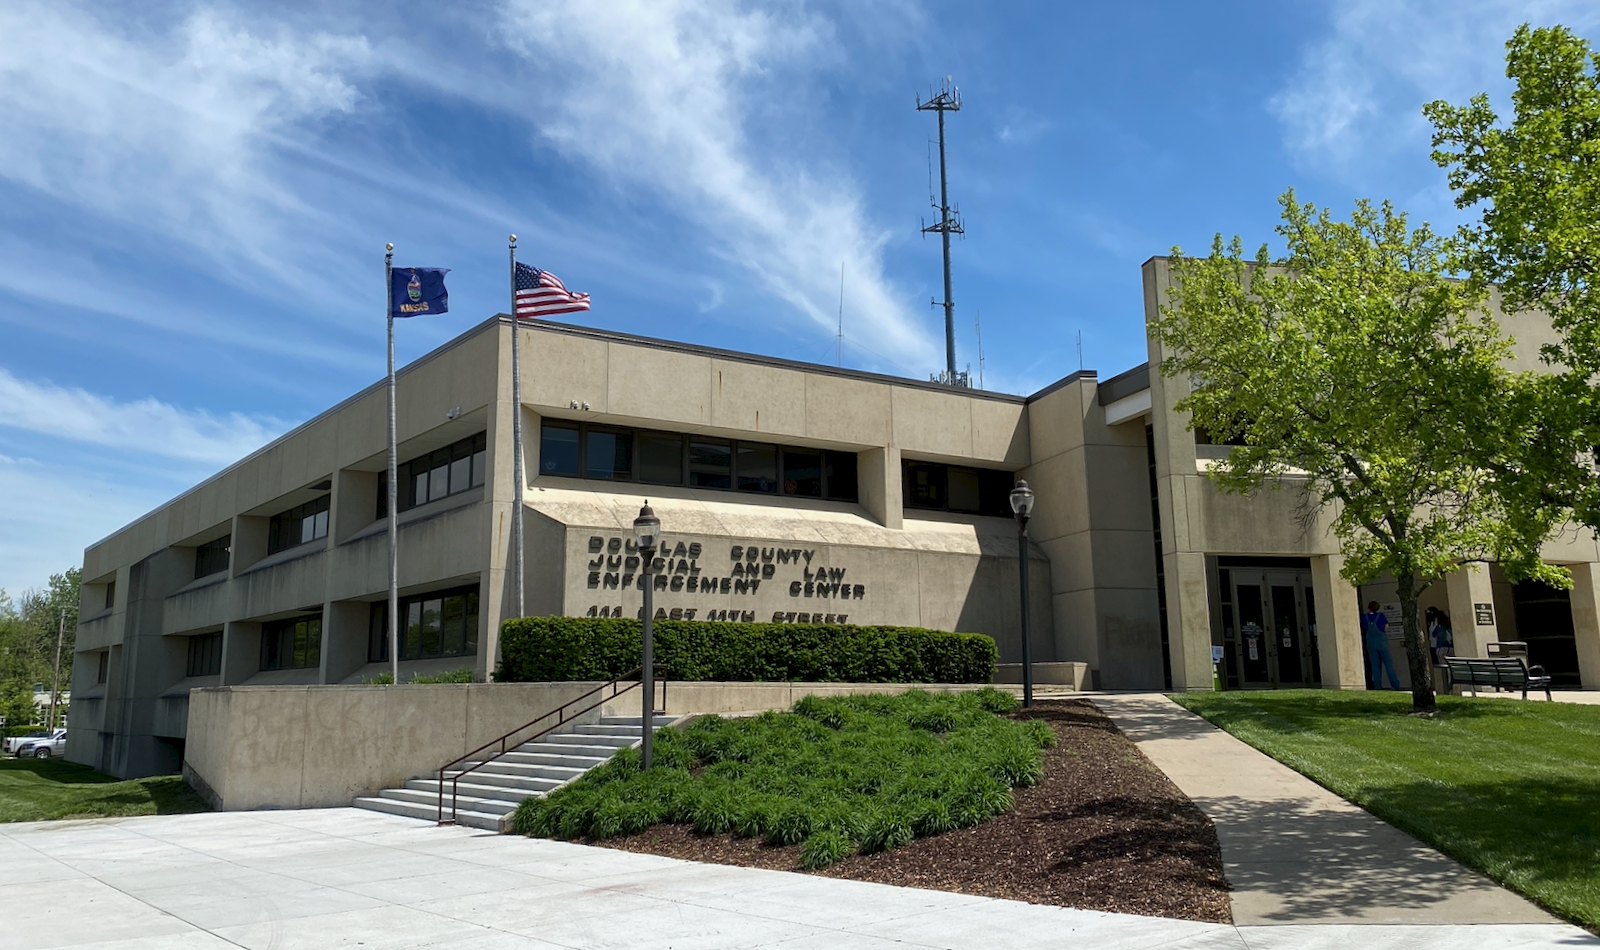 Where did the livestreams go? Most Douglas County District Court